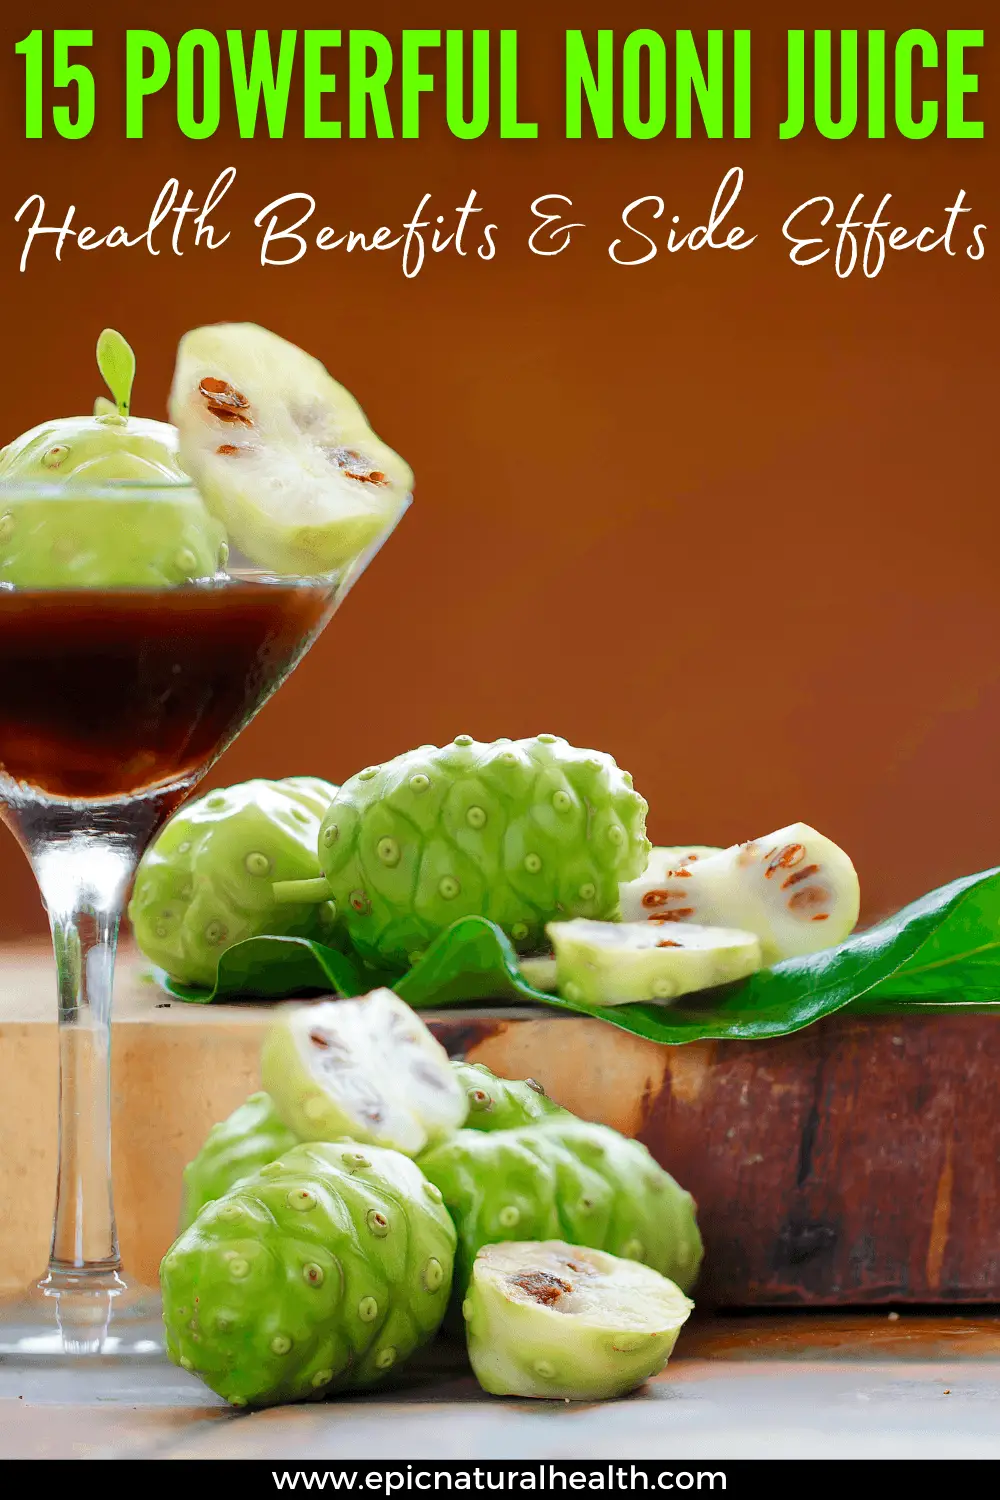 noni juice health denefits and side effects